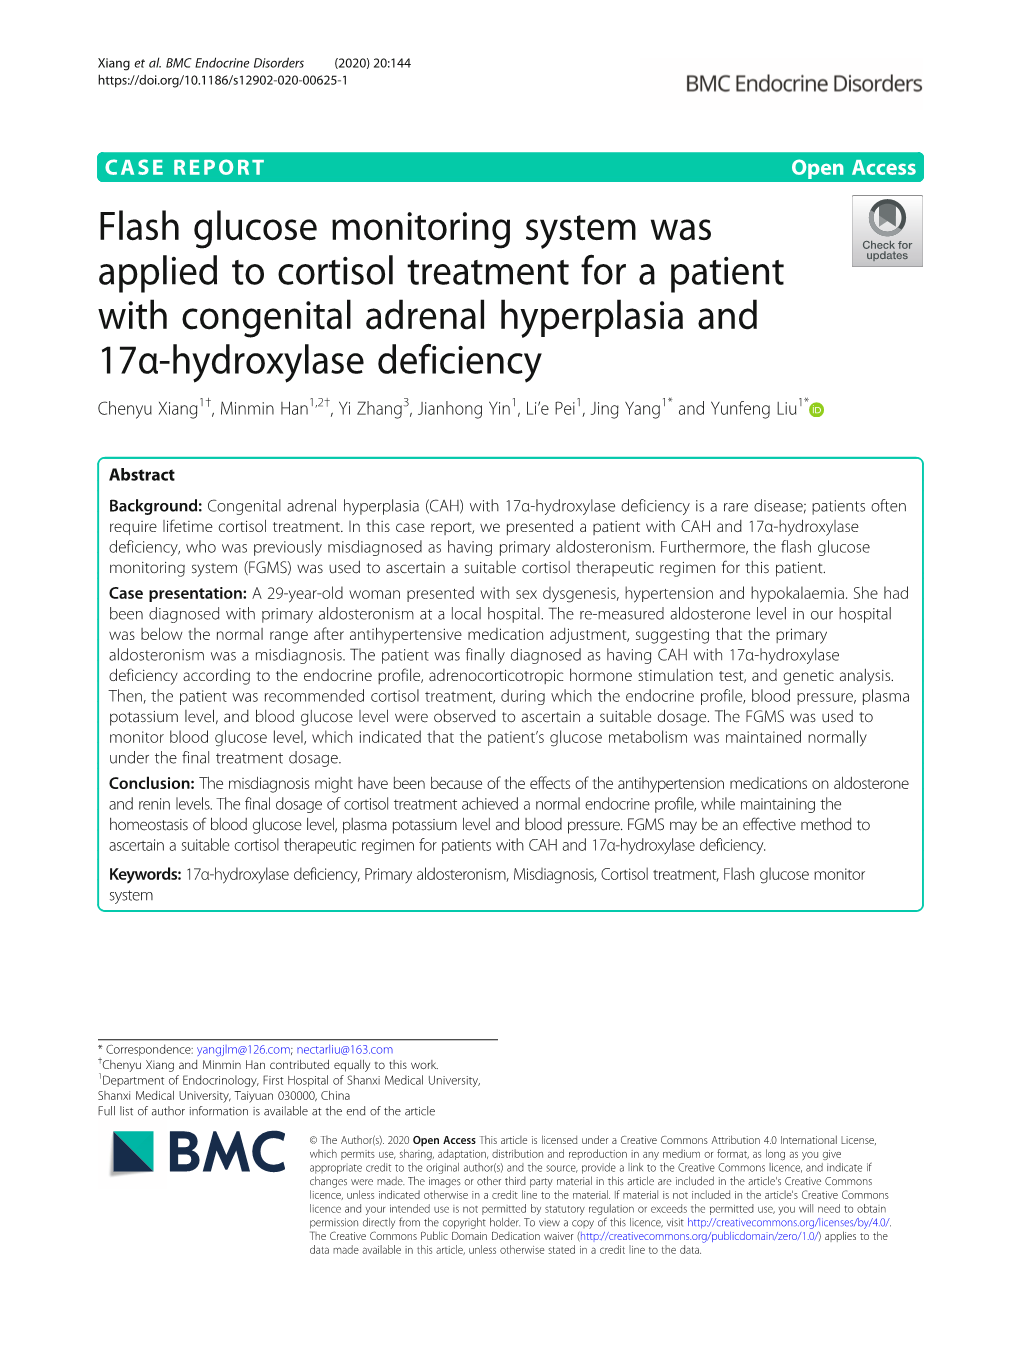 Flash Glucose Monitoring System Was Applied to Cortisol Treatment for A